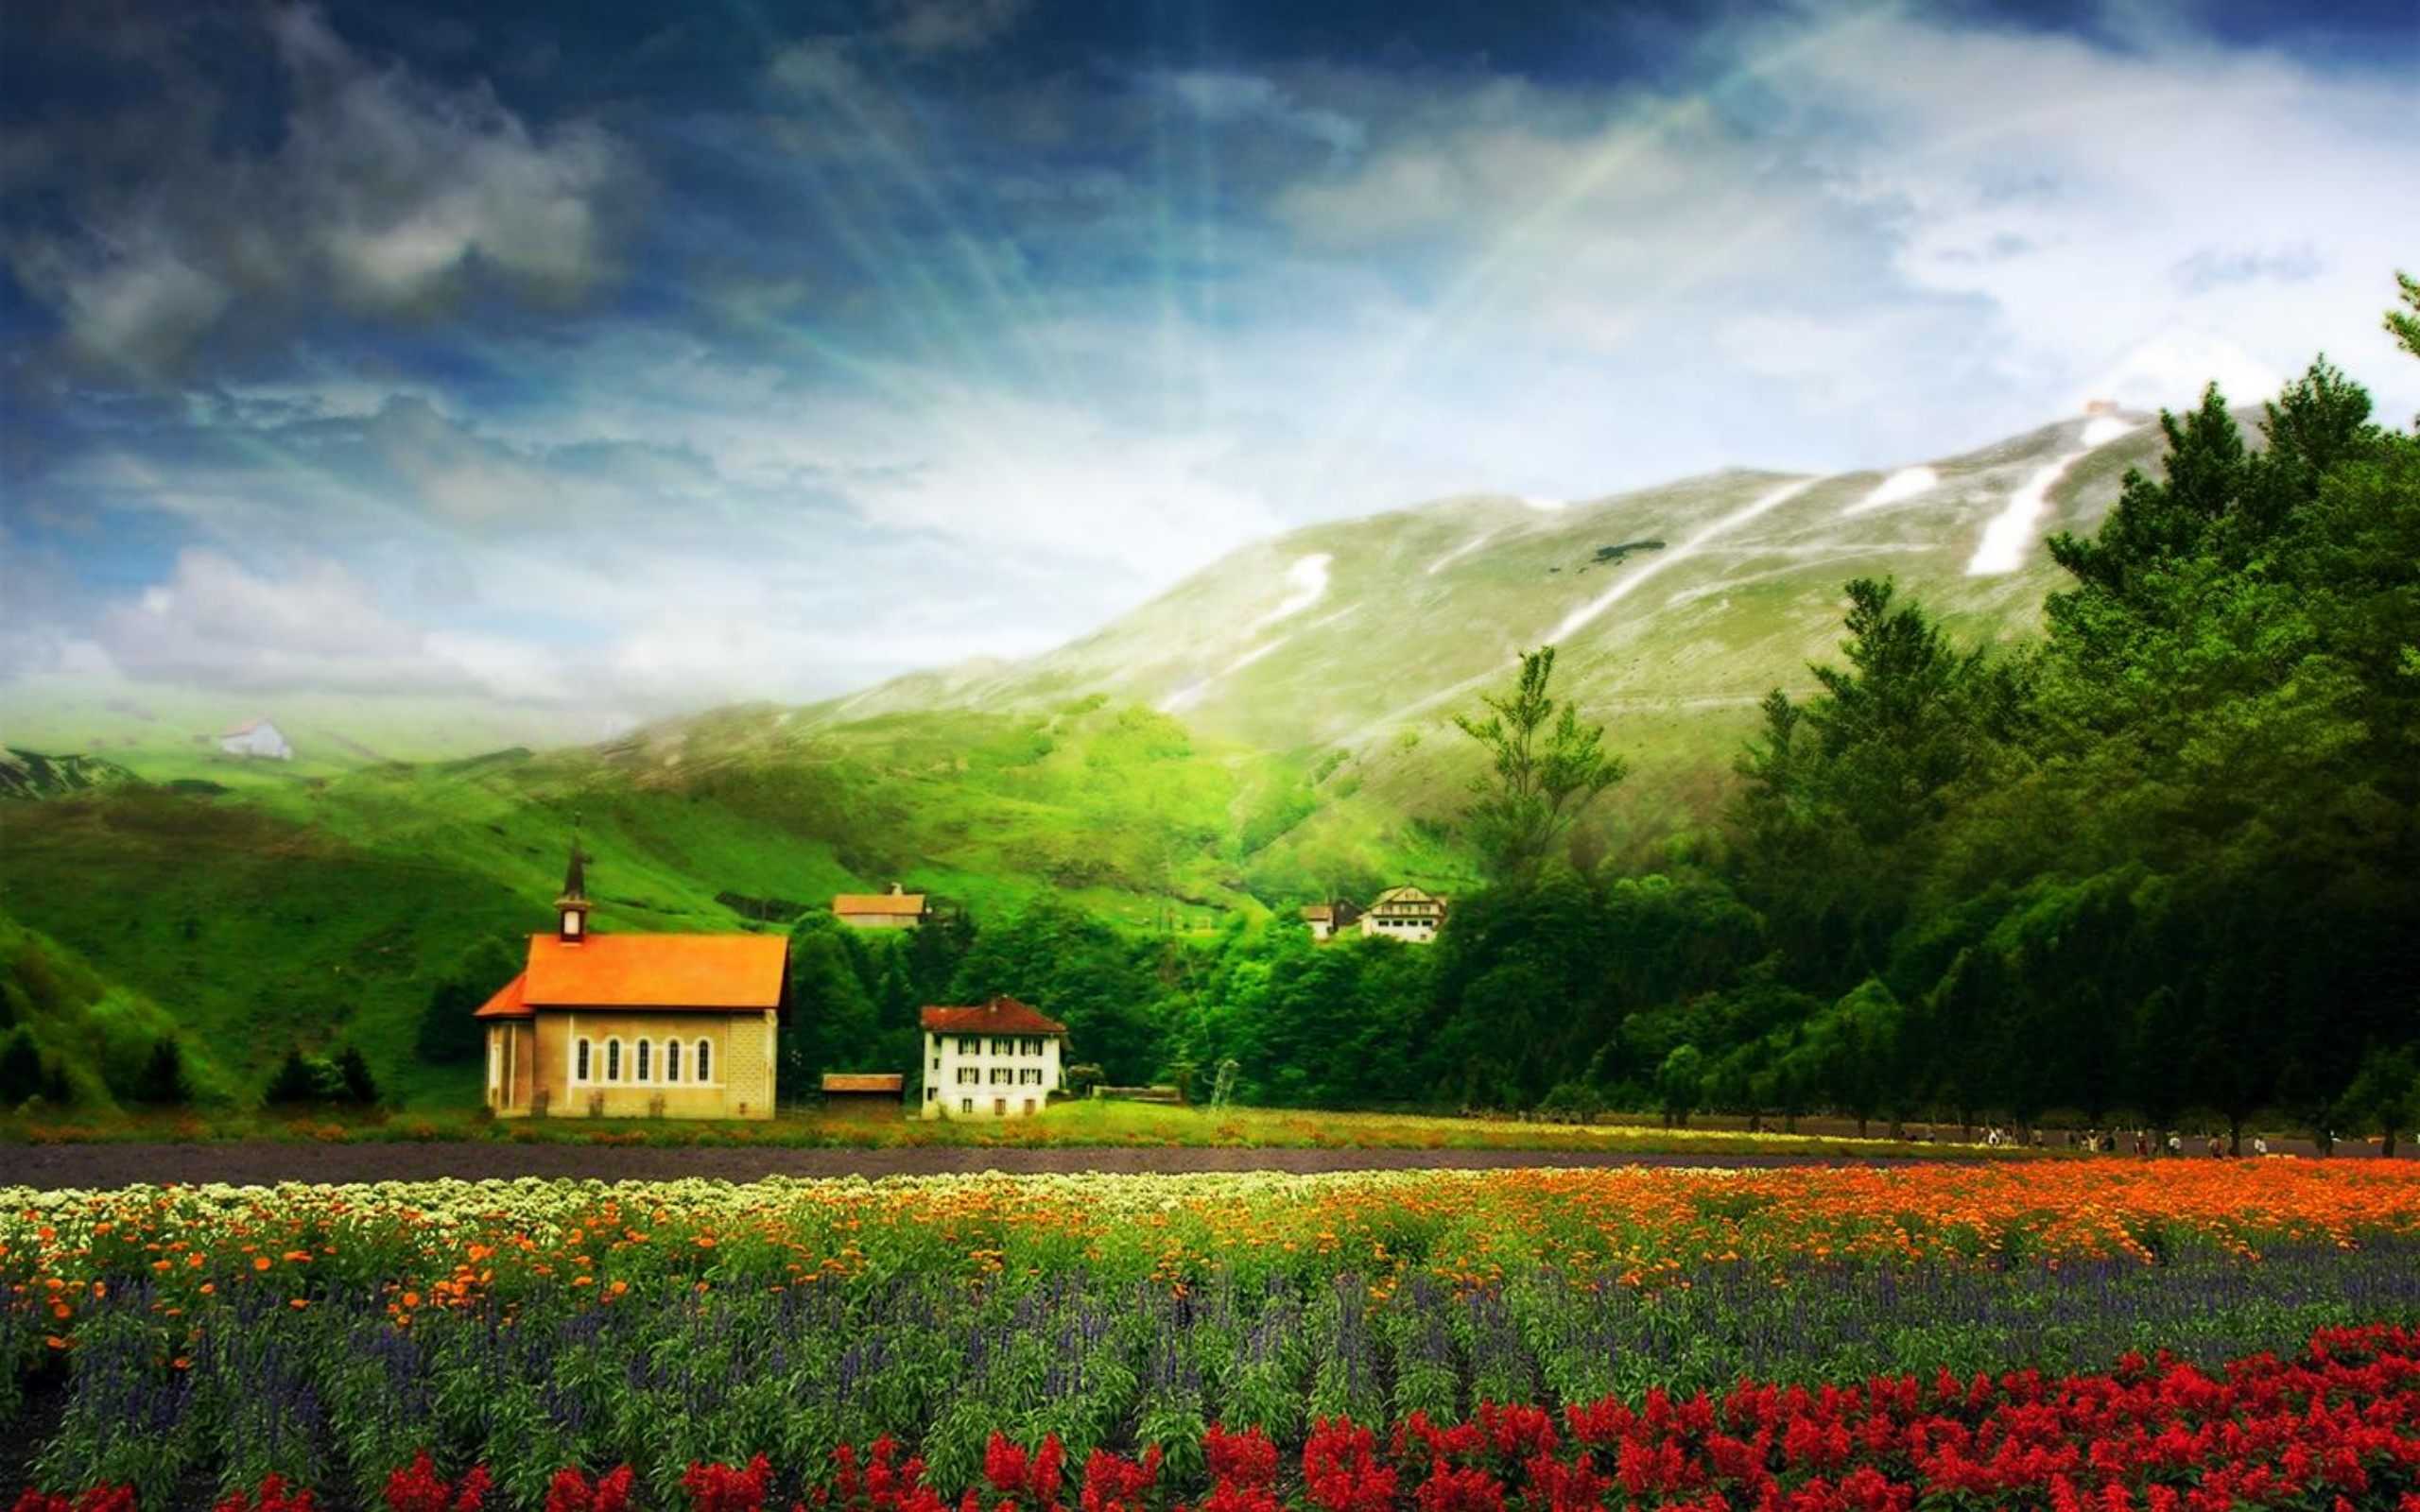 25 Outstanding wallpaper for desktop scenery You Can Get It free ...